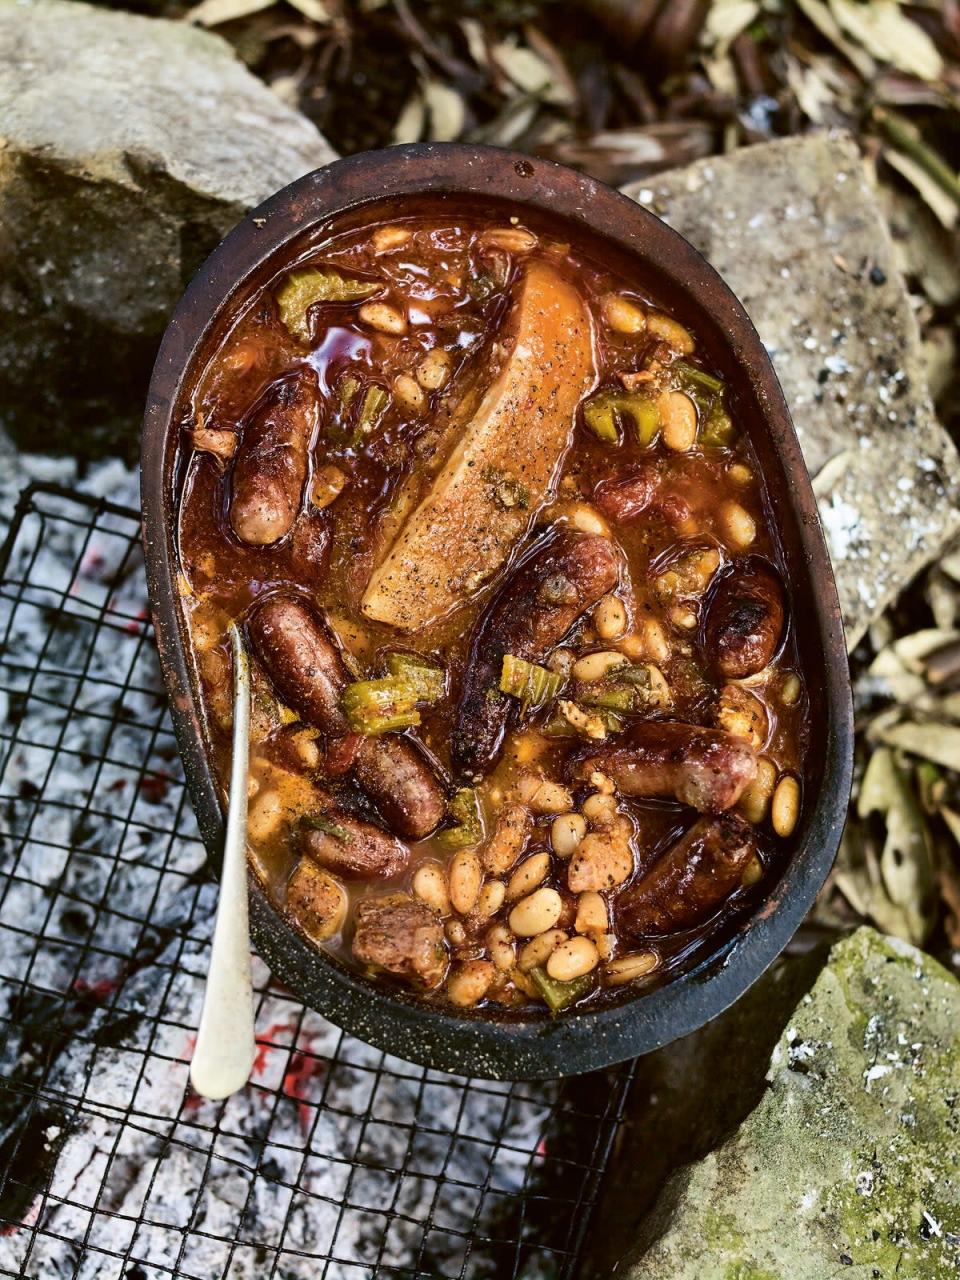 This dish is somewhere between a cassoulet and Boston baked beans (Andrew Montgomery/PA)